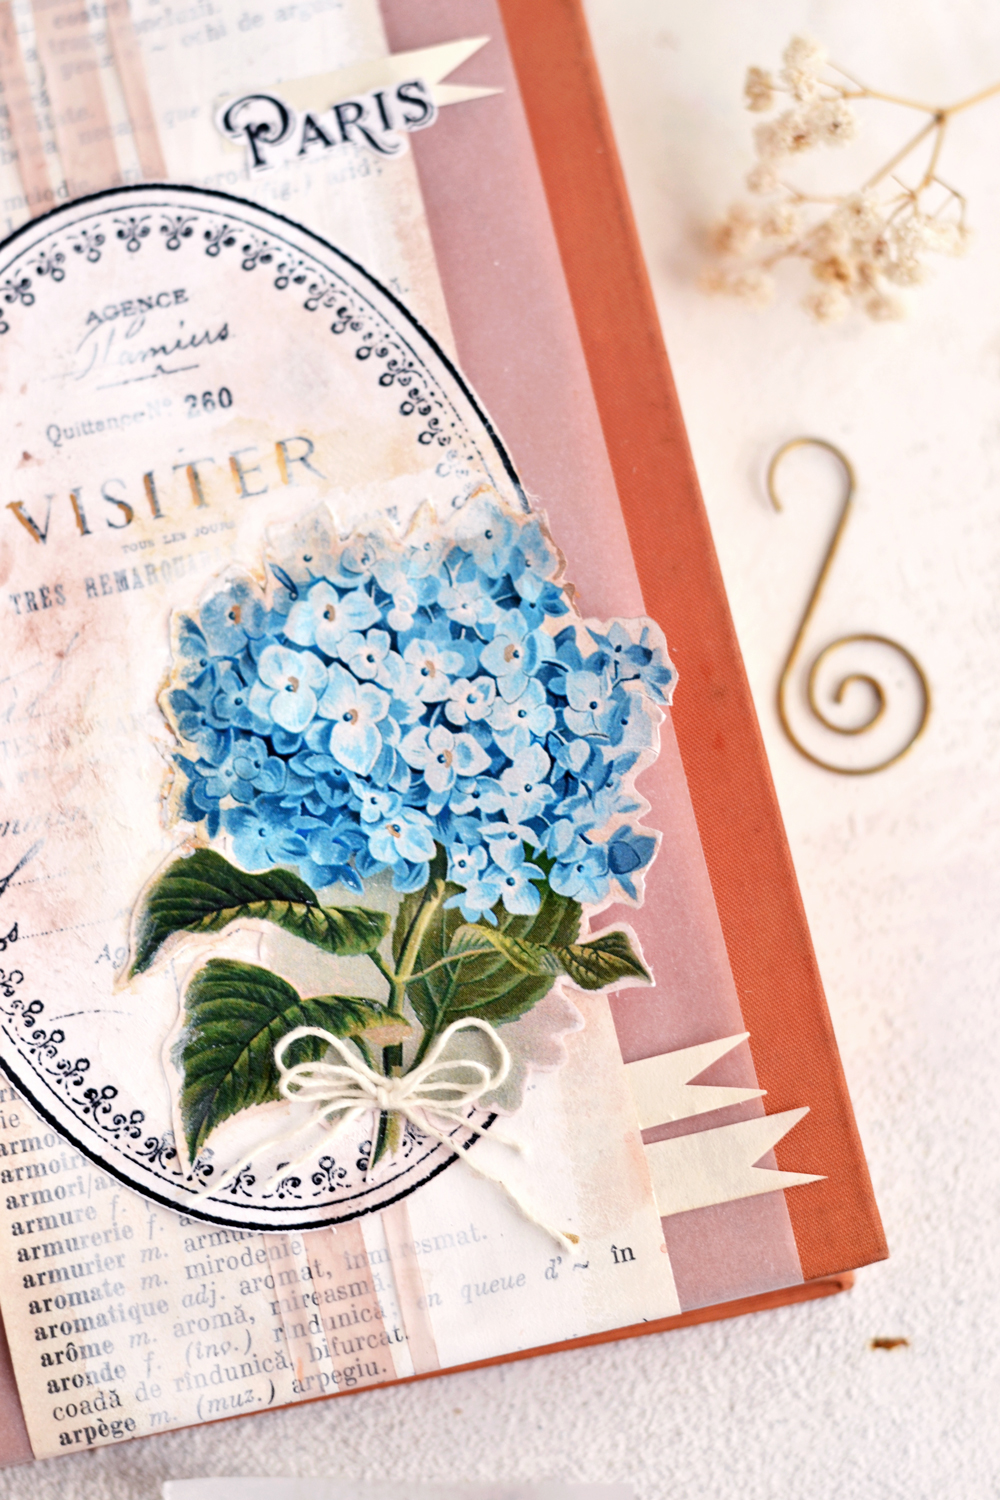 DIY Vintage French Art Journal Cover - learn how to easily make this DIY project using supplies that you might have around and an old dictionary! #DIY #vintage #freeprintable #hydrangea #artjournal #junkjournal 